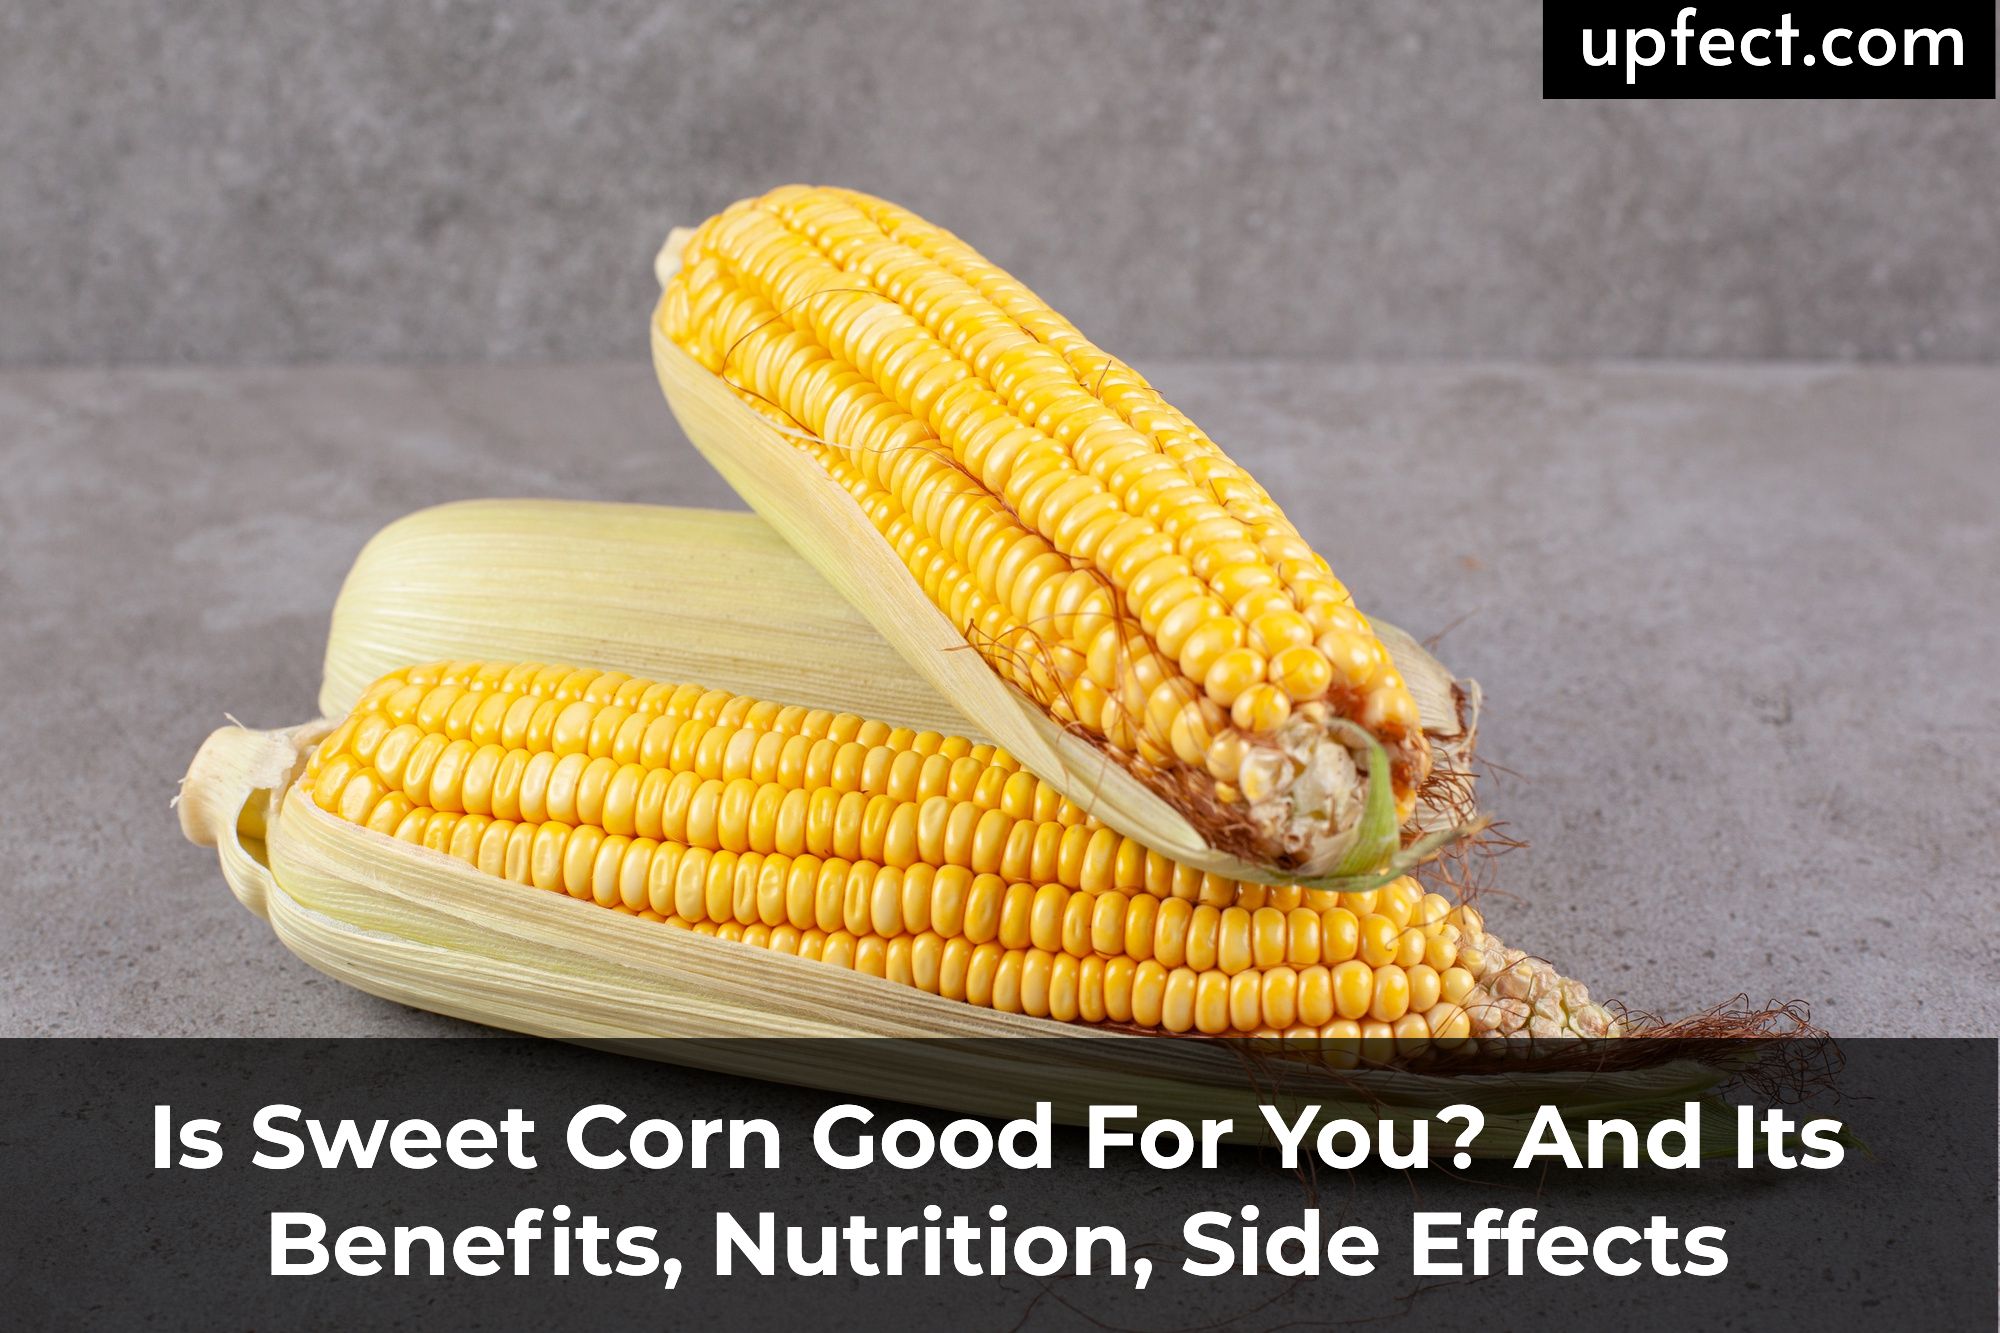 Is Sweet Corn Good For You? And Its Benefits, Nutrition, Side Effects